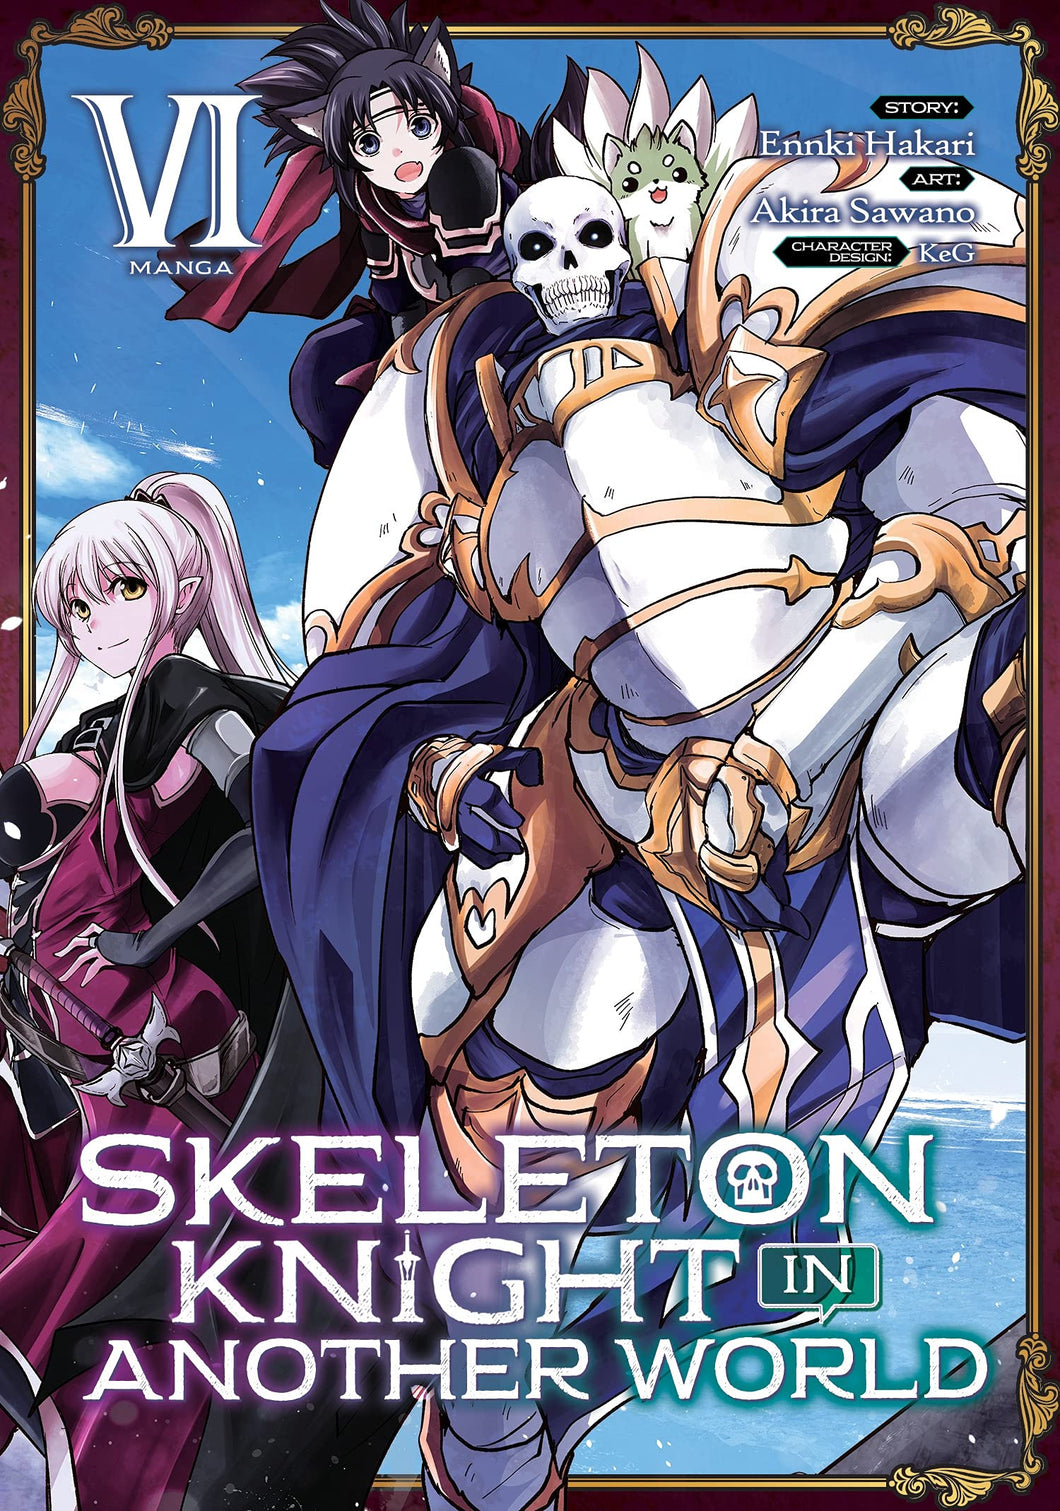 Skeleton Knight in Another World Volume 6